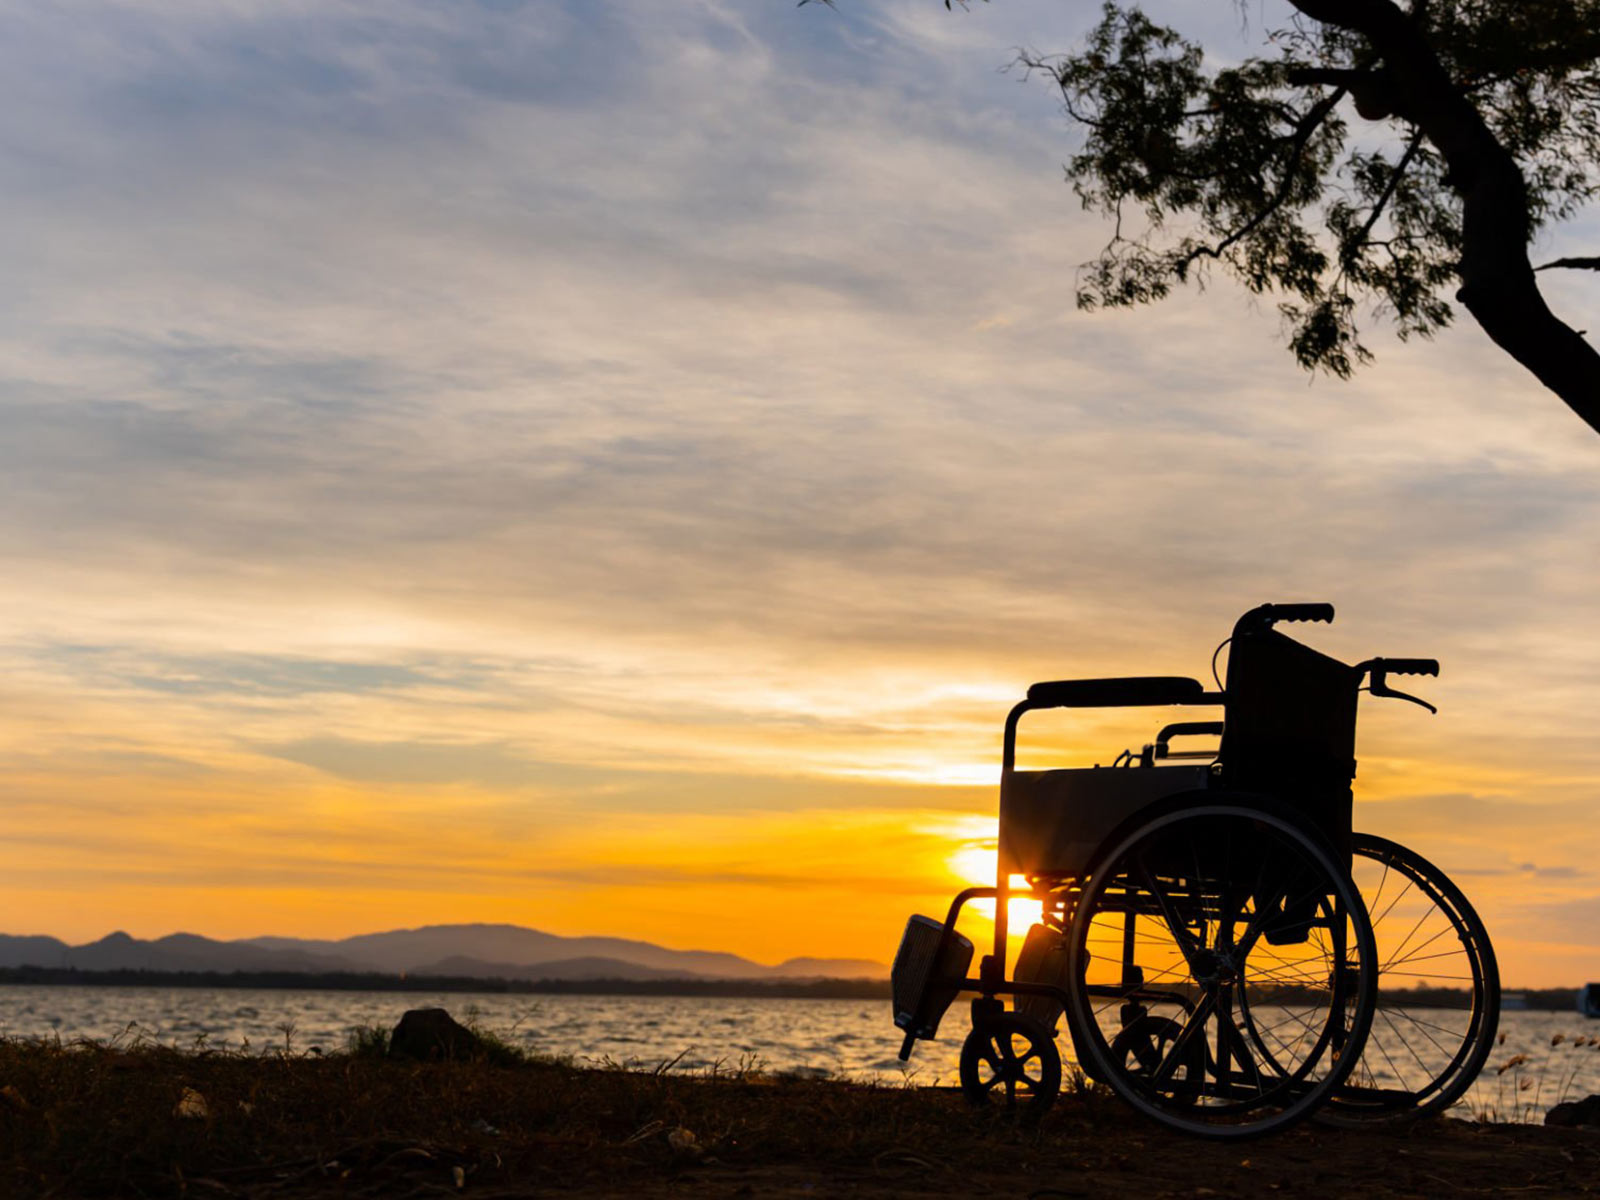 Image of a wheelchair placed to the left of a tree situated on the right side, facing towards the sun in the background on a grassy field near an ocean.